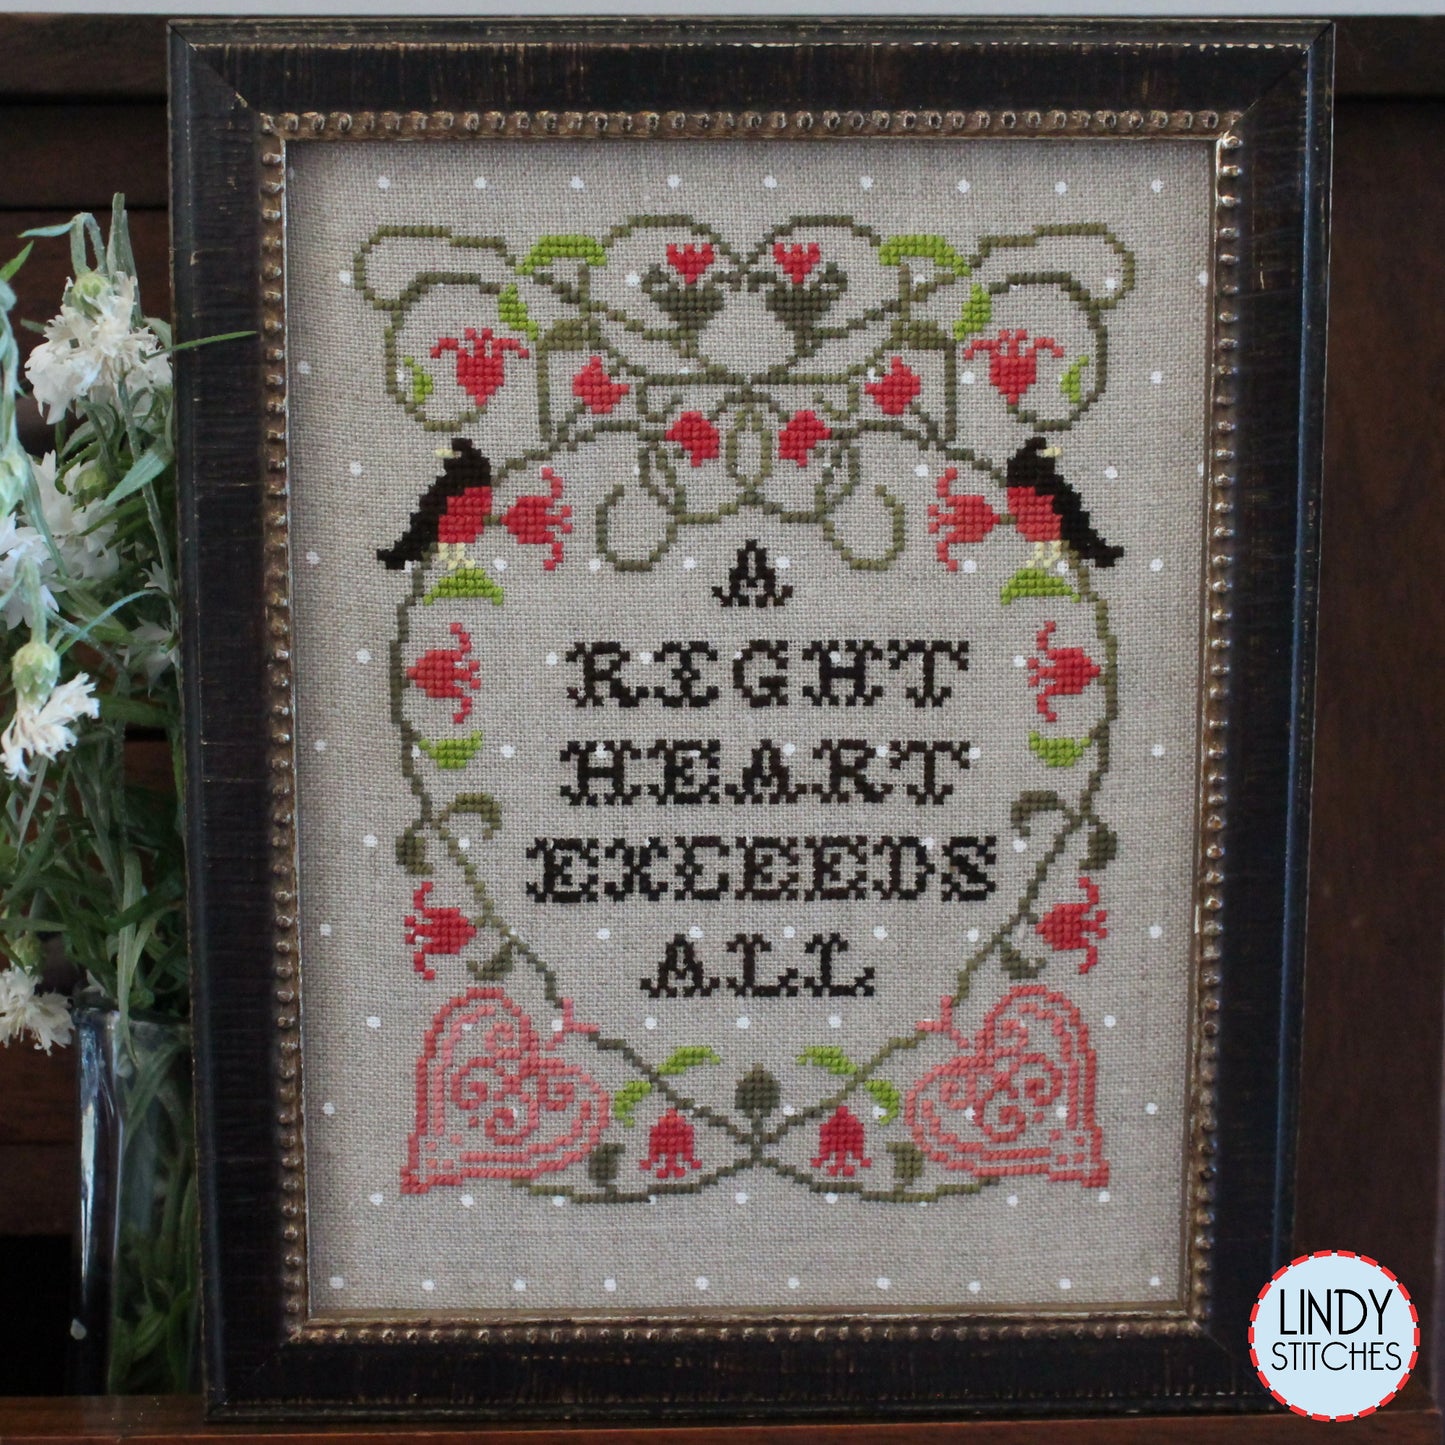 Let Me Not Forget Cross Stitch Pattern by Lindy Stitches